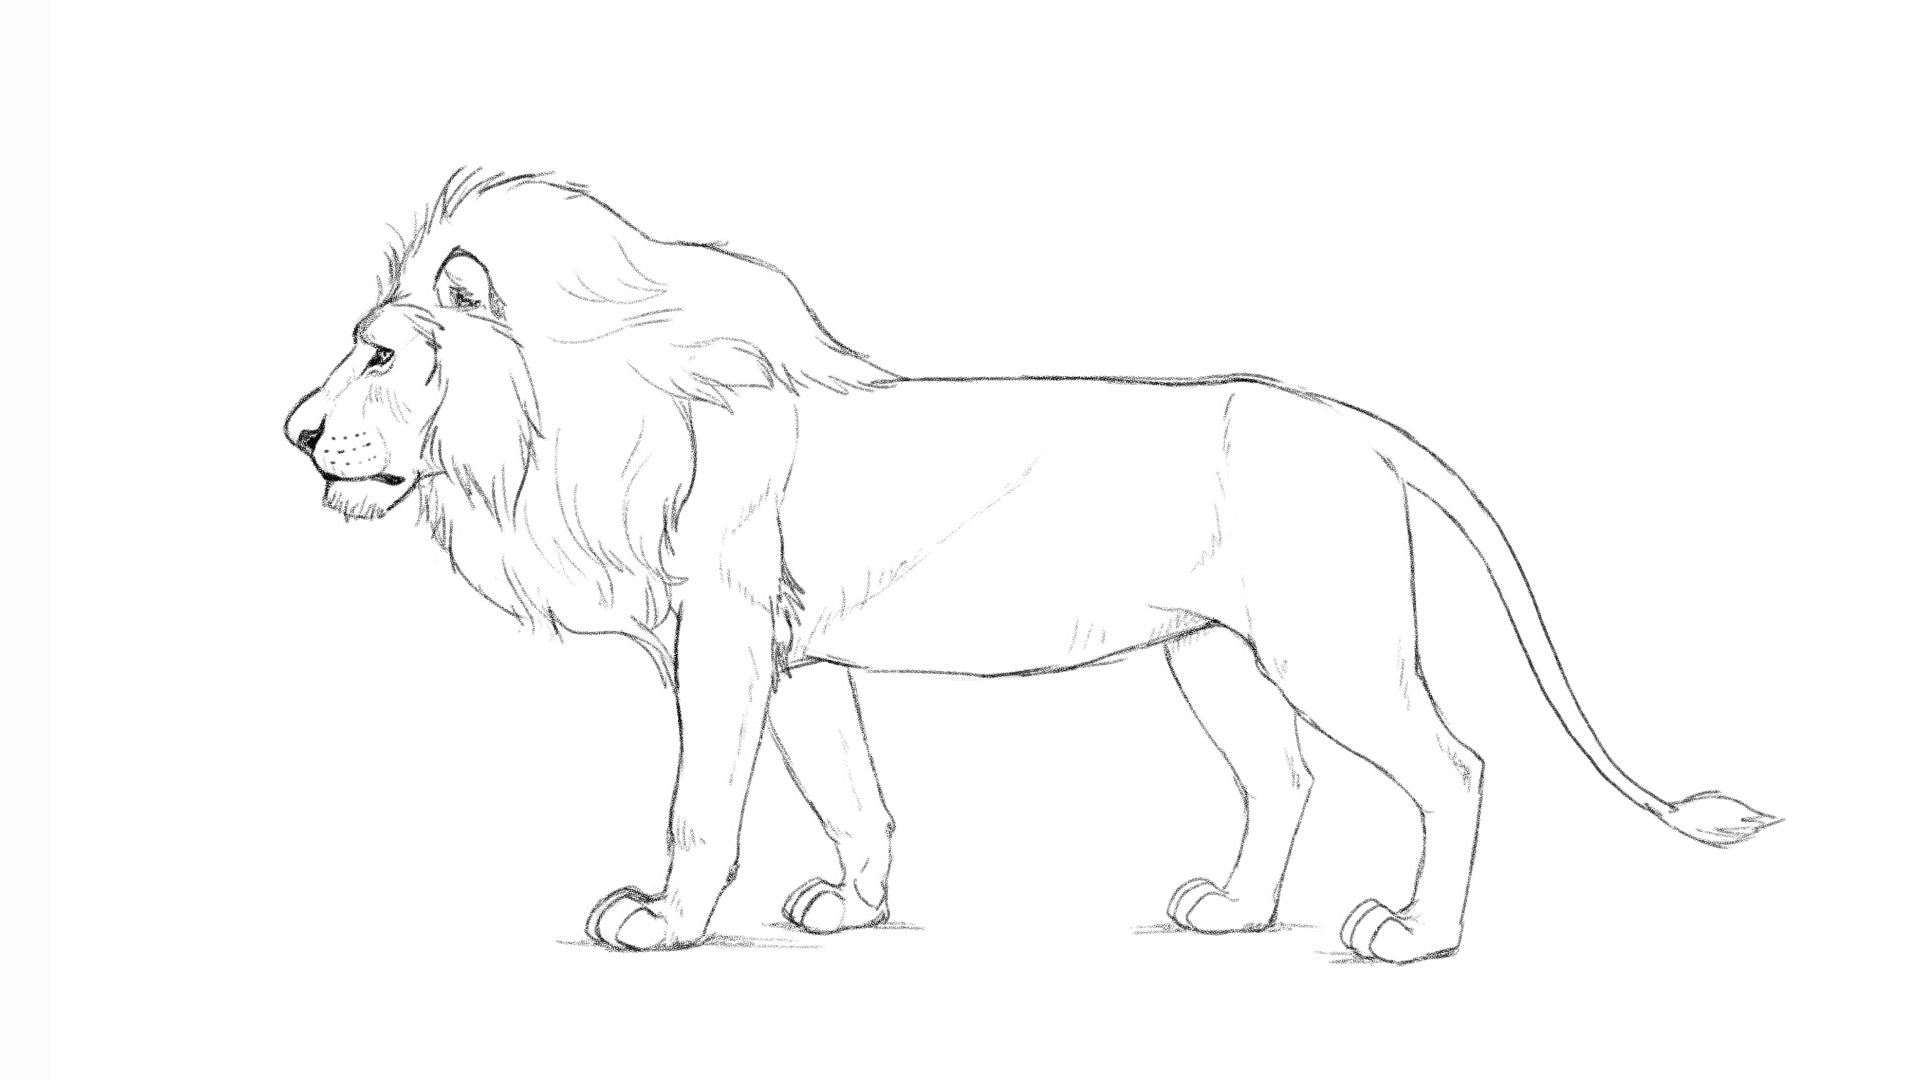 sketch of lion with hatching